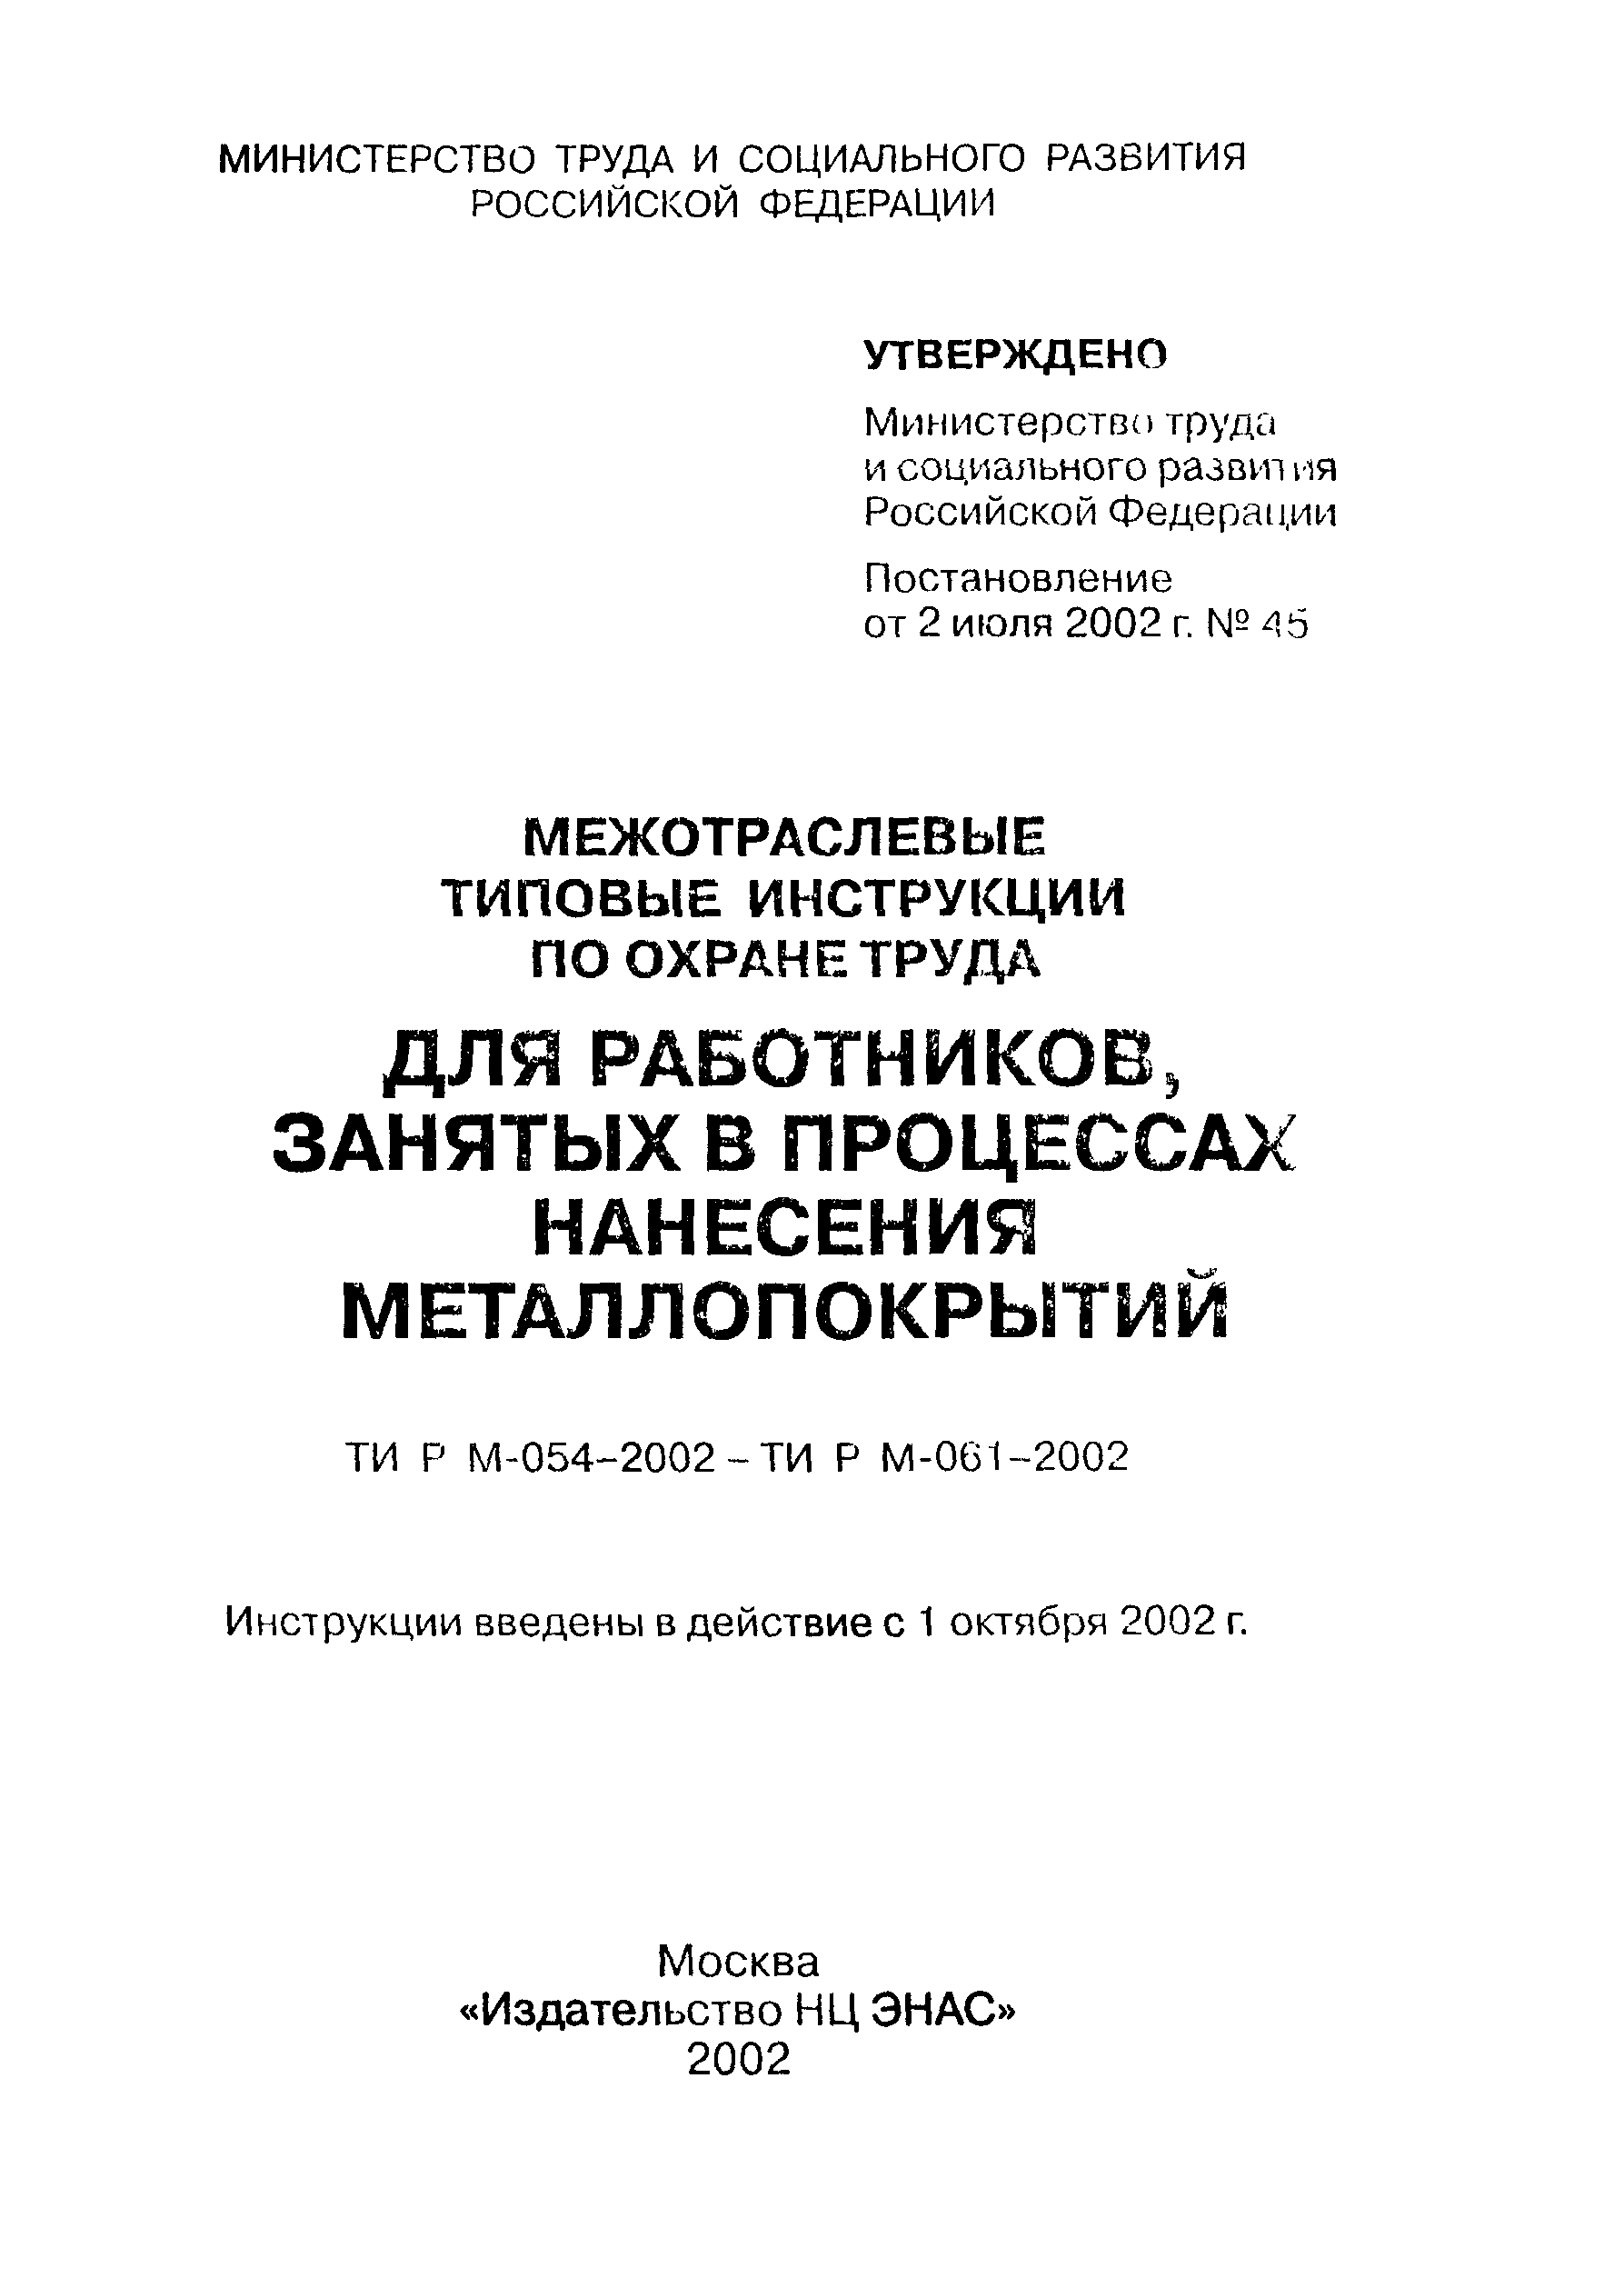 ТИ Р М-056-2002